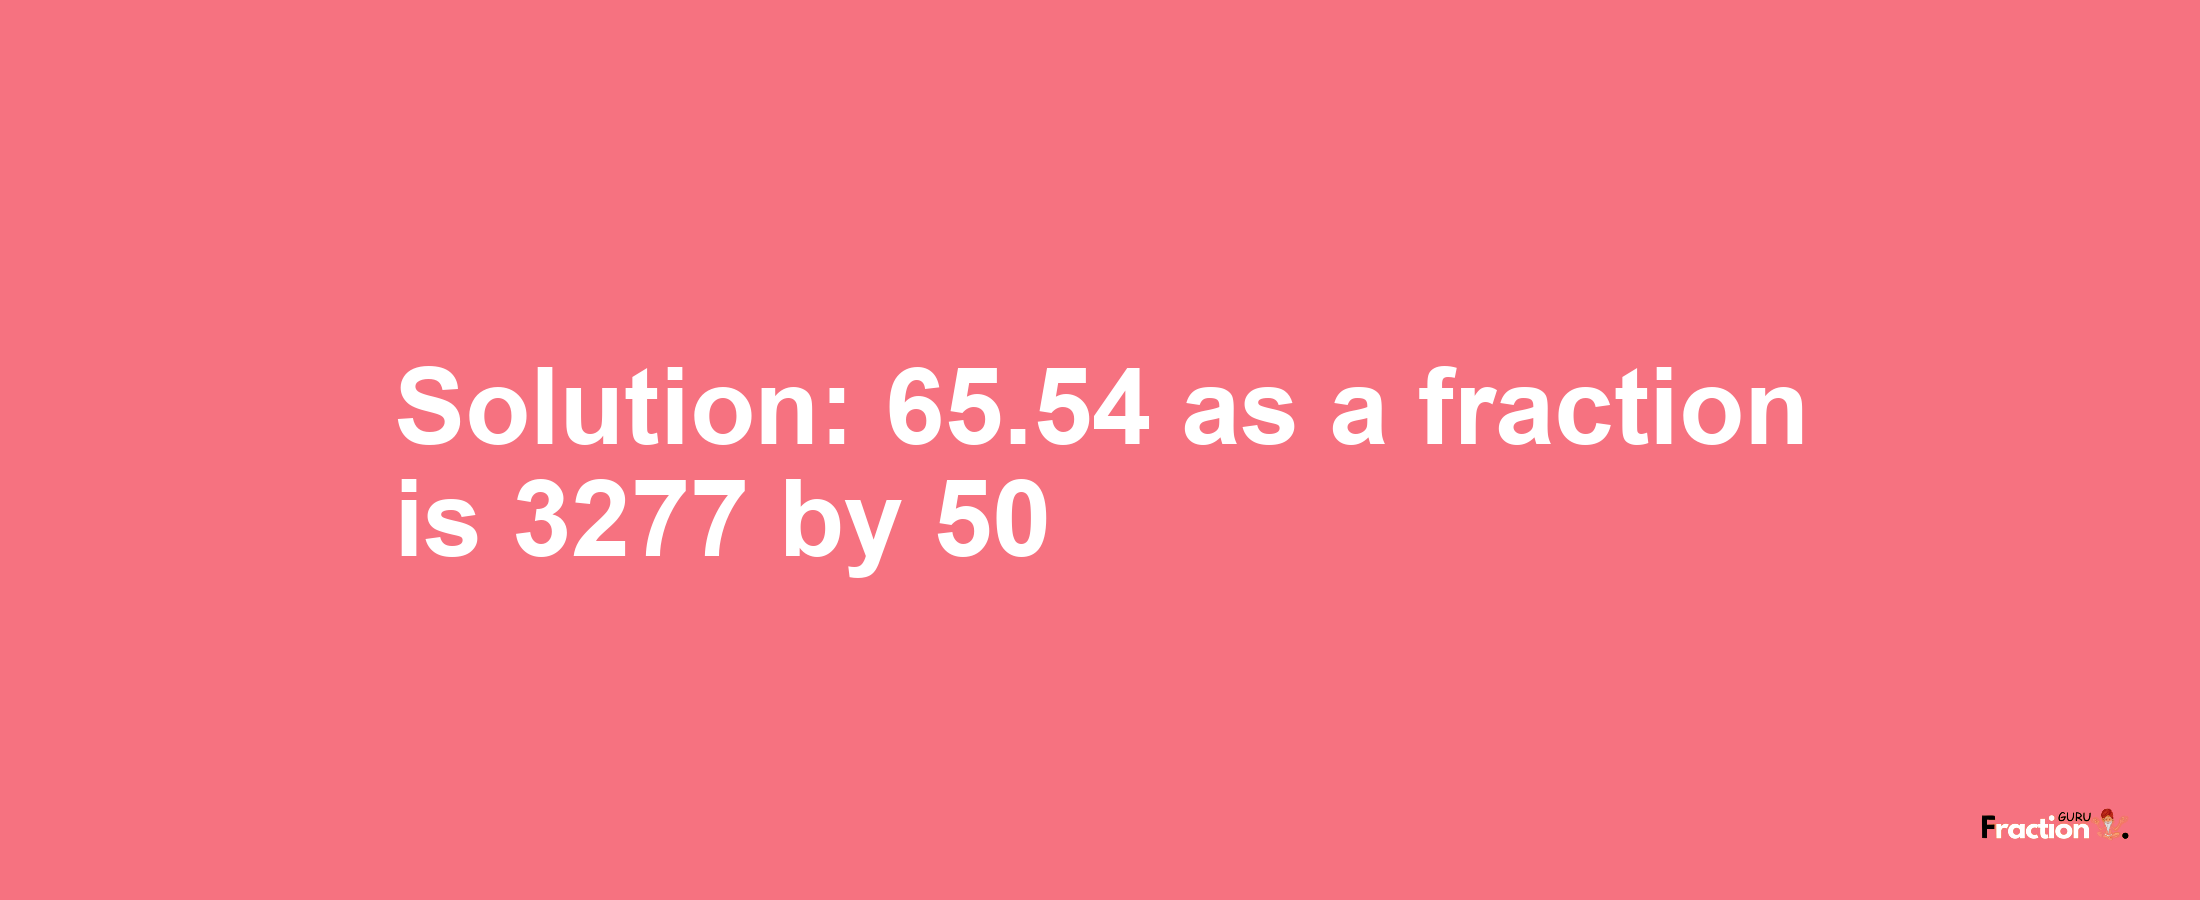 Solution:65.54 as a fraction is 3277/50